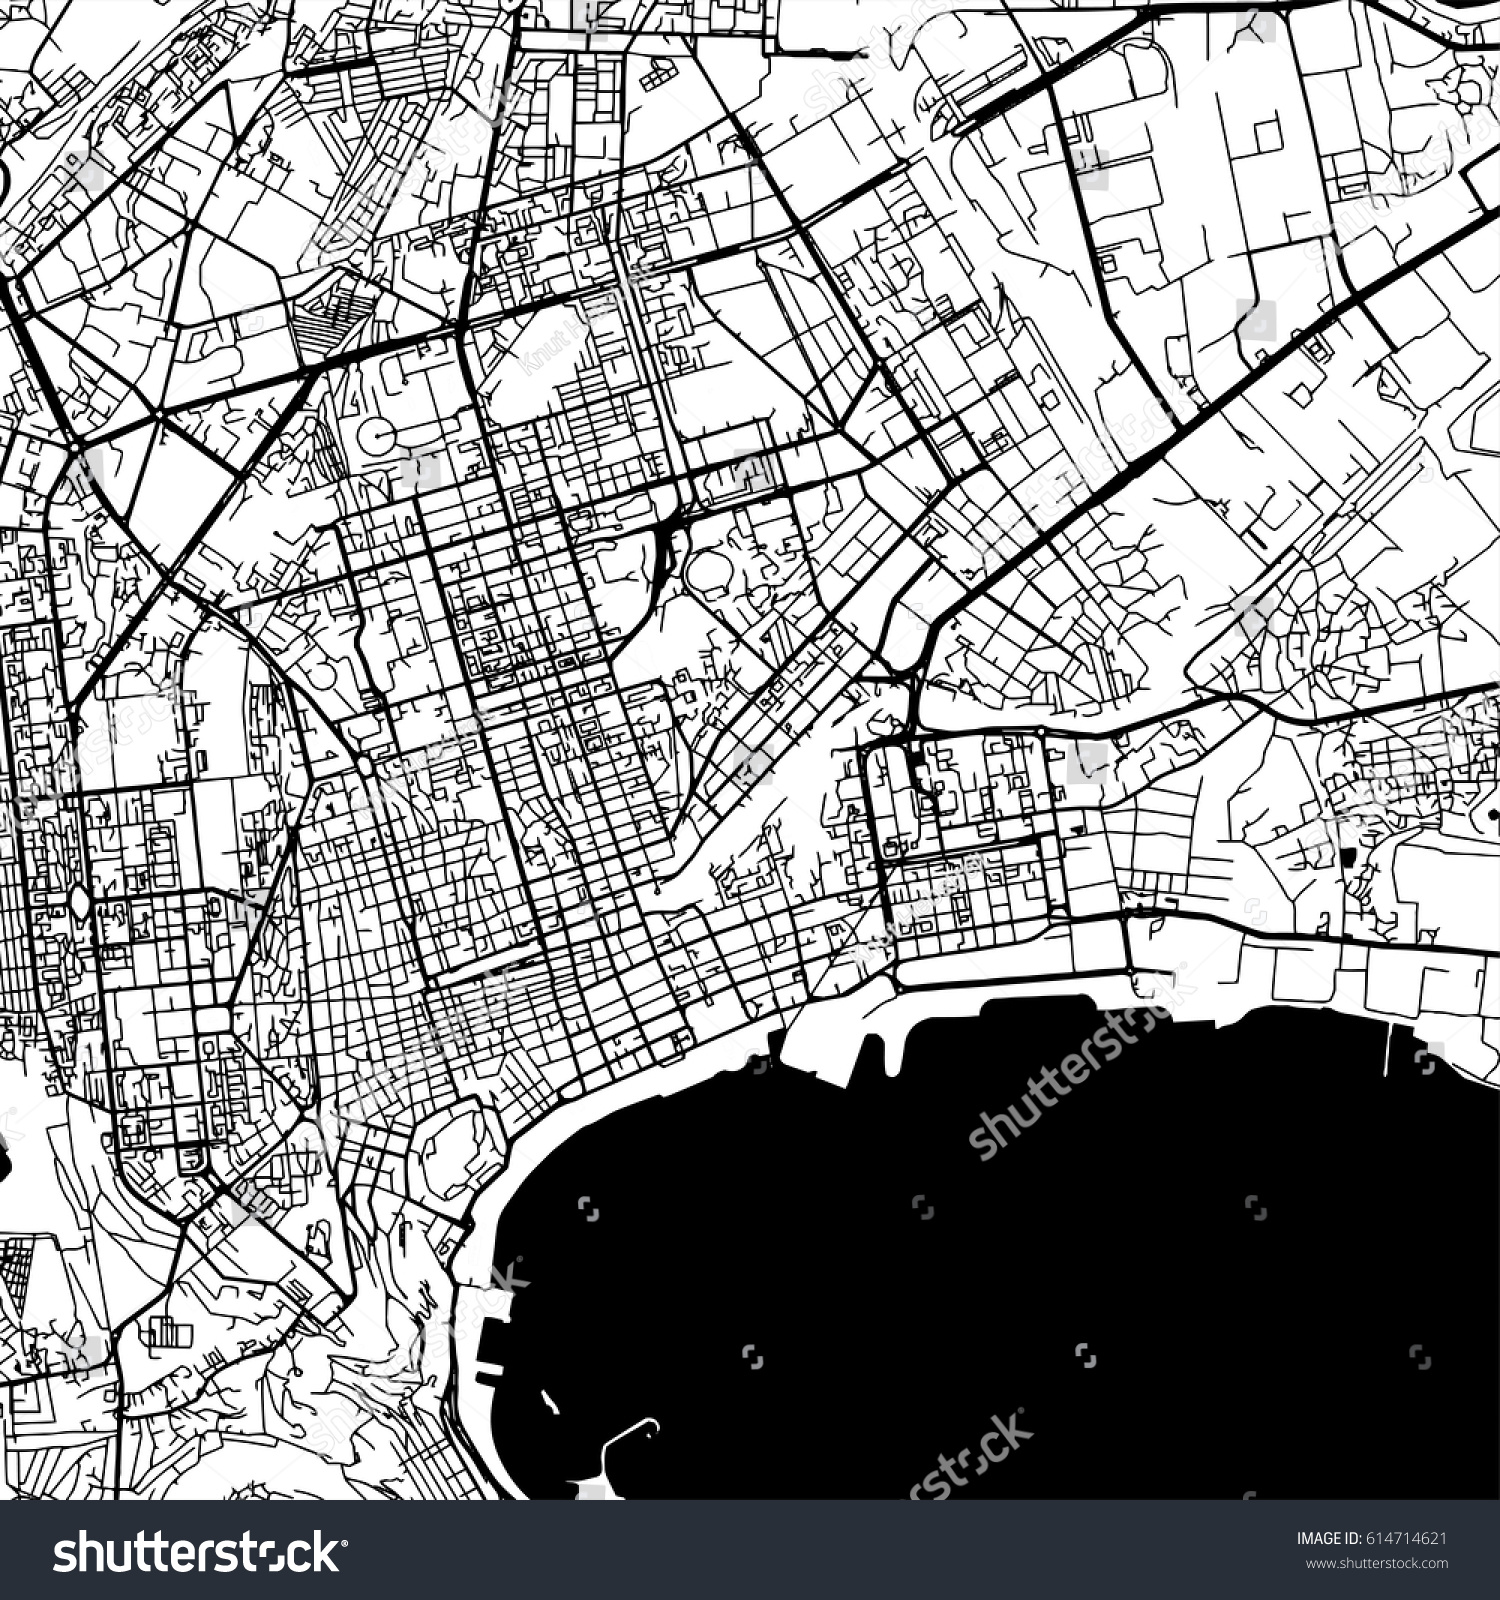 SVG of Baku Azerbaijan Vector Map Monochrome Artprint, Vector Outline Version for Infographic Background, Black Streets and Waterways svg